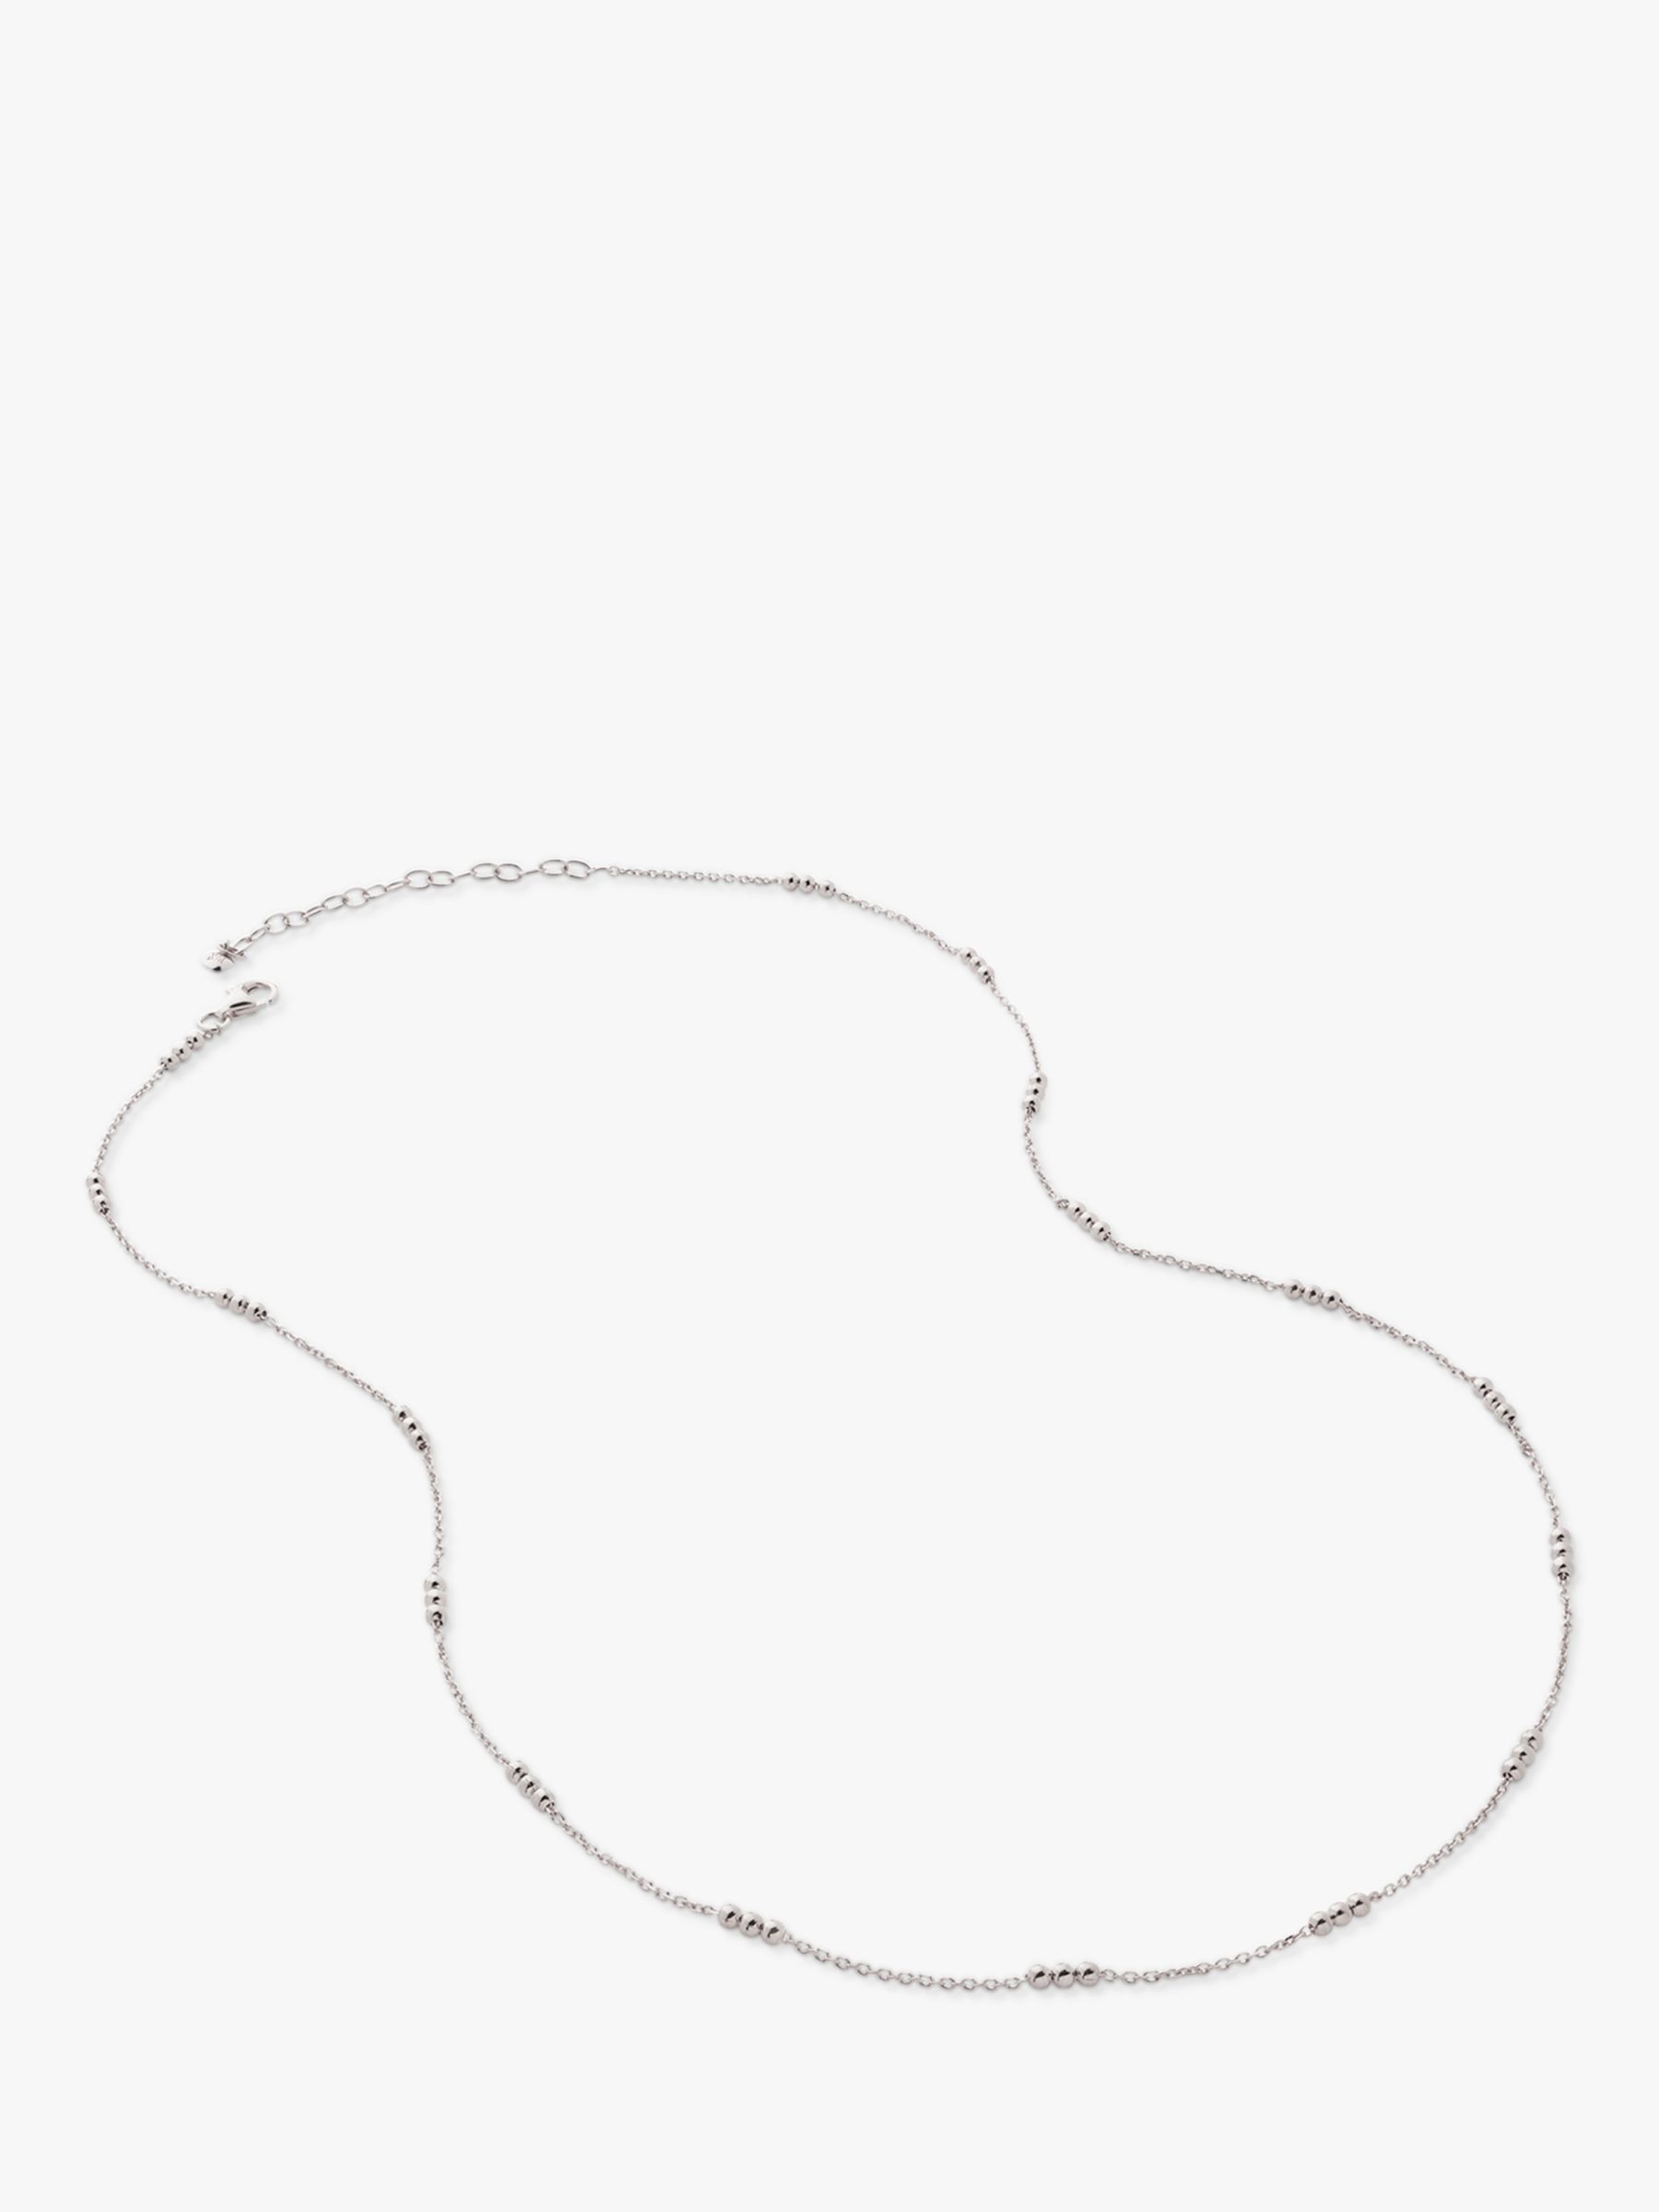 Monica Vinader Triple Beaded Chain Necklace, Silver at John Lewis ...